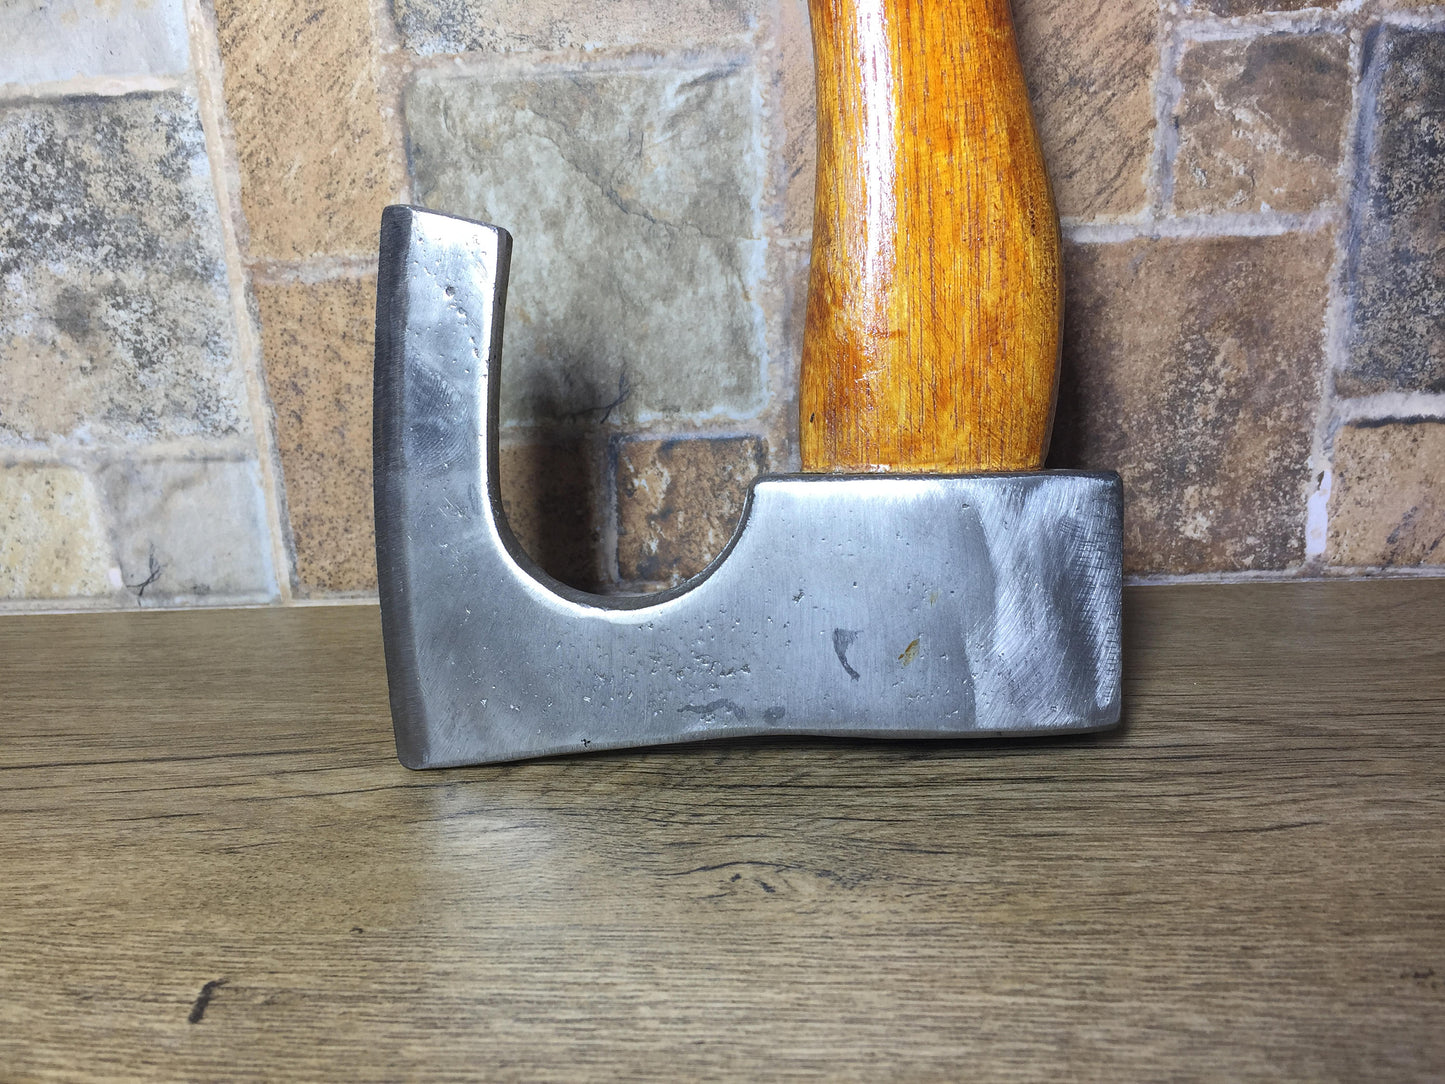 Stainless steel axe, viking axe, medieval axe, iron gift for him, hatchet, hunting, mens gifts, chopping axe,gifts for men, manly iron gifts